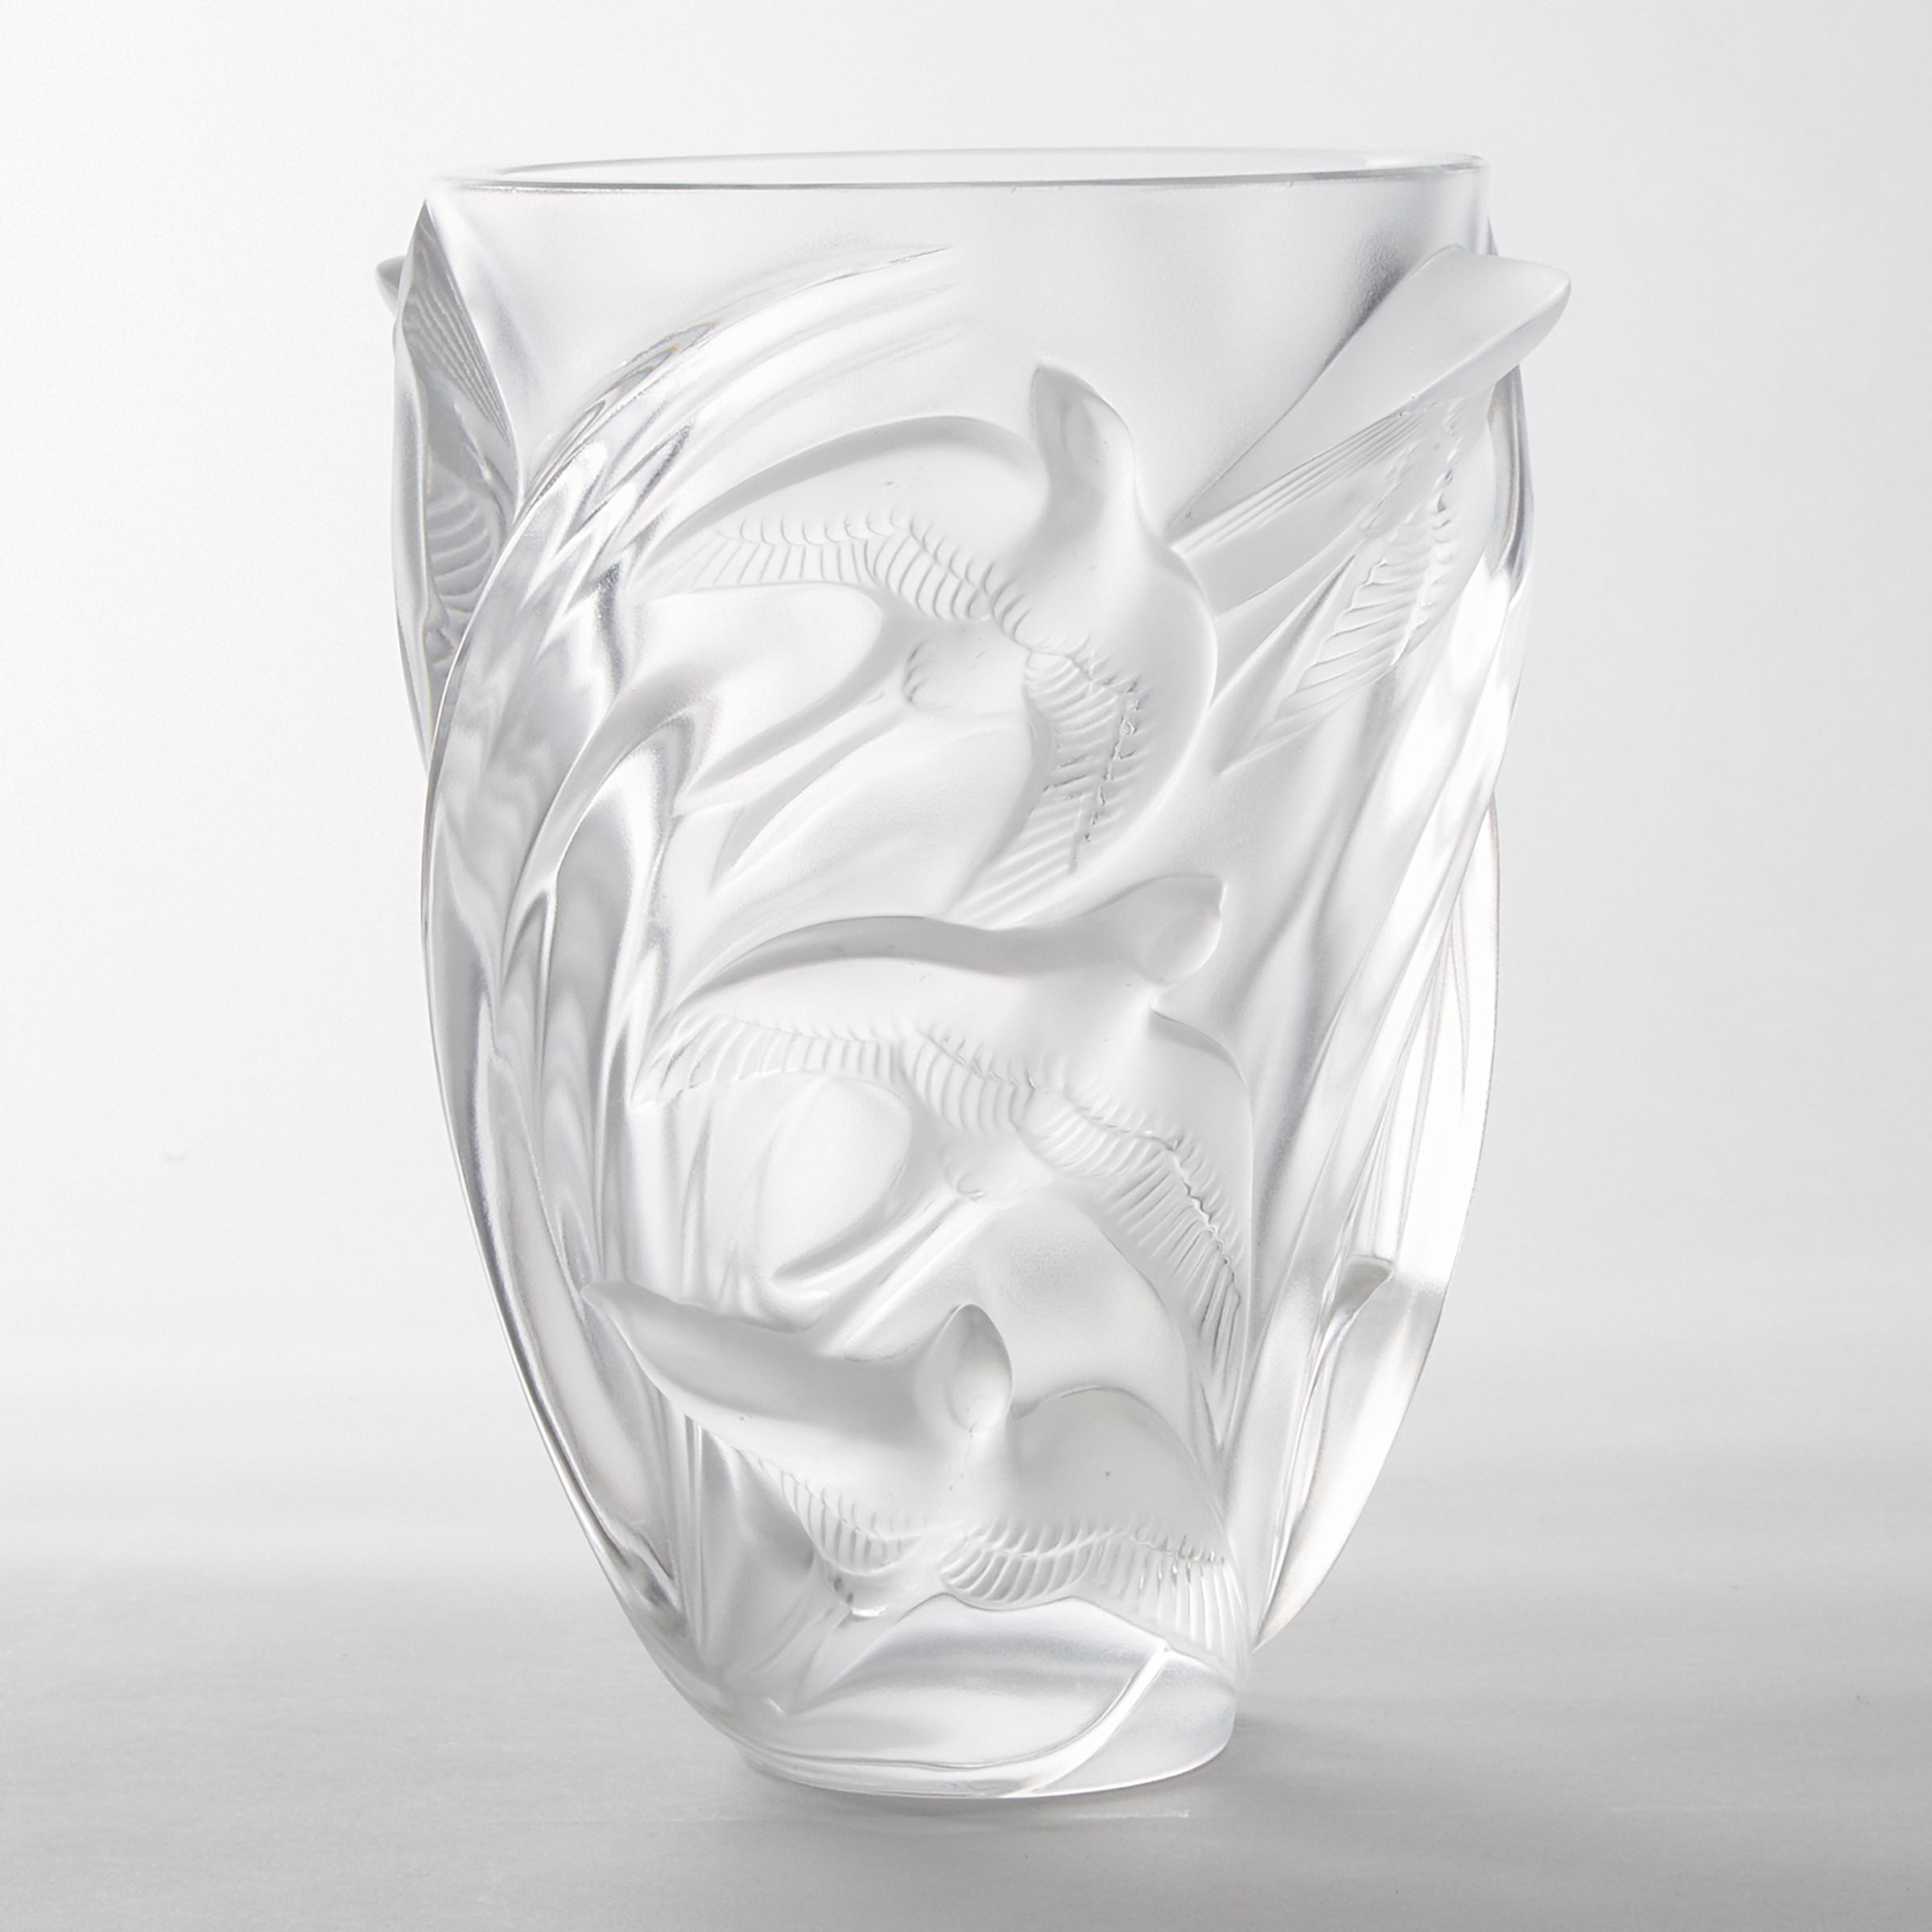 'Martinets', Lalique Moulded and Frosted Glass Vase, post-1978